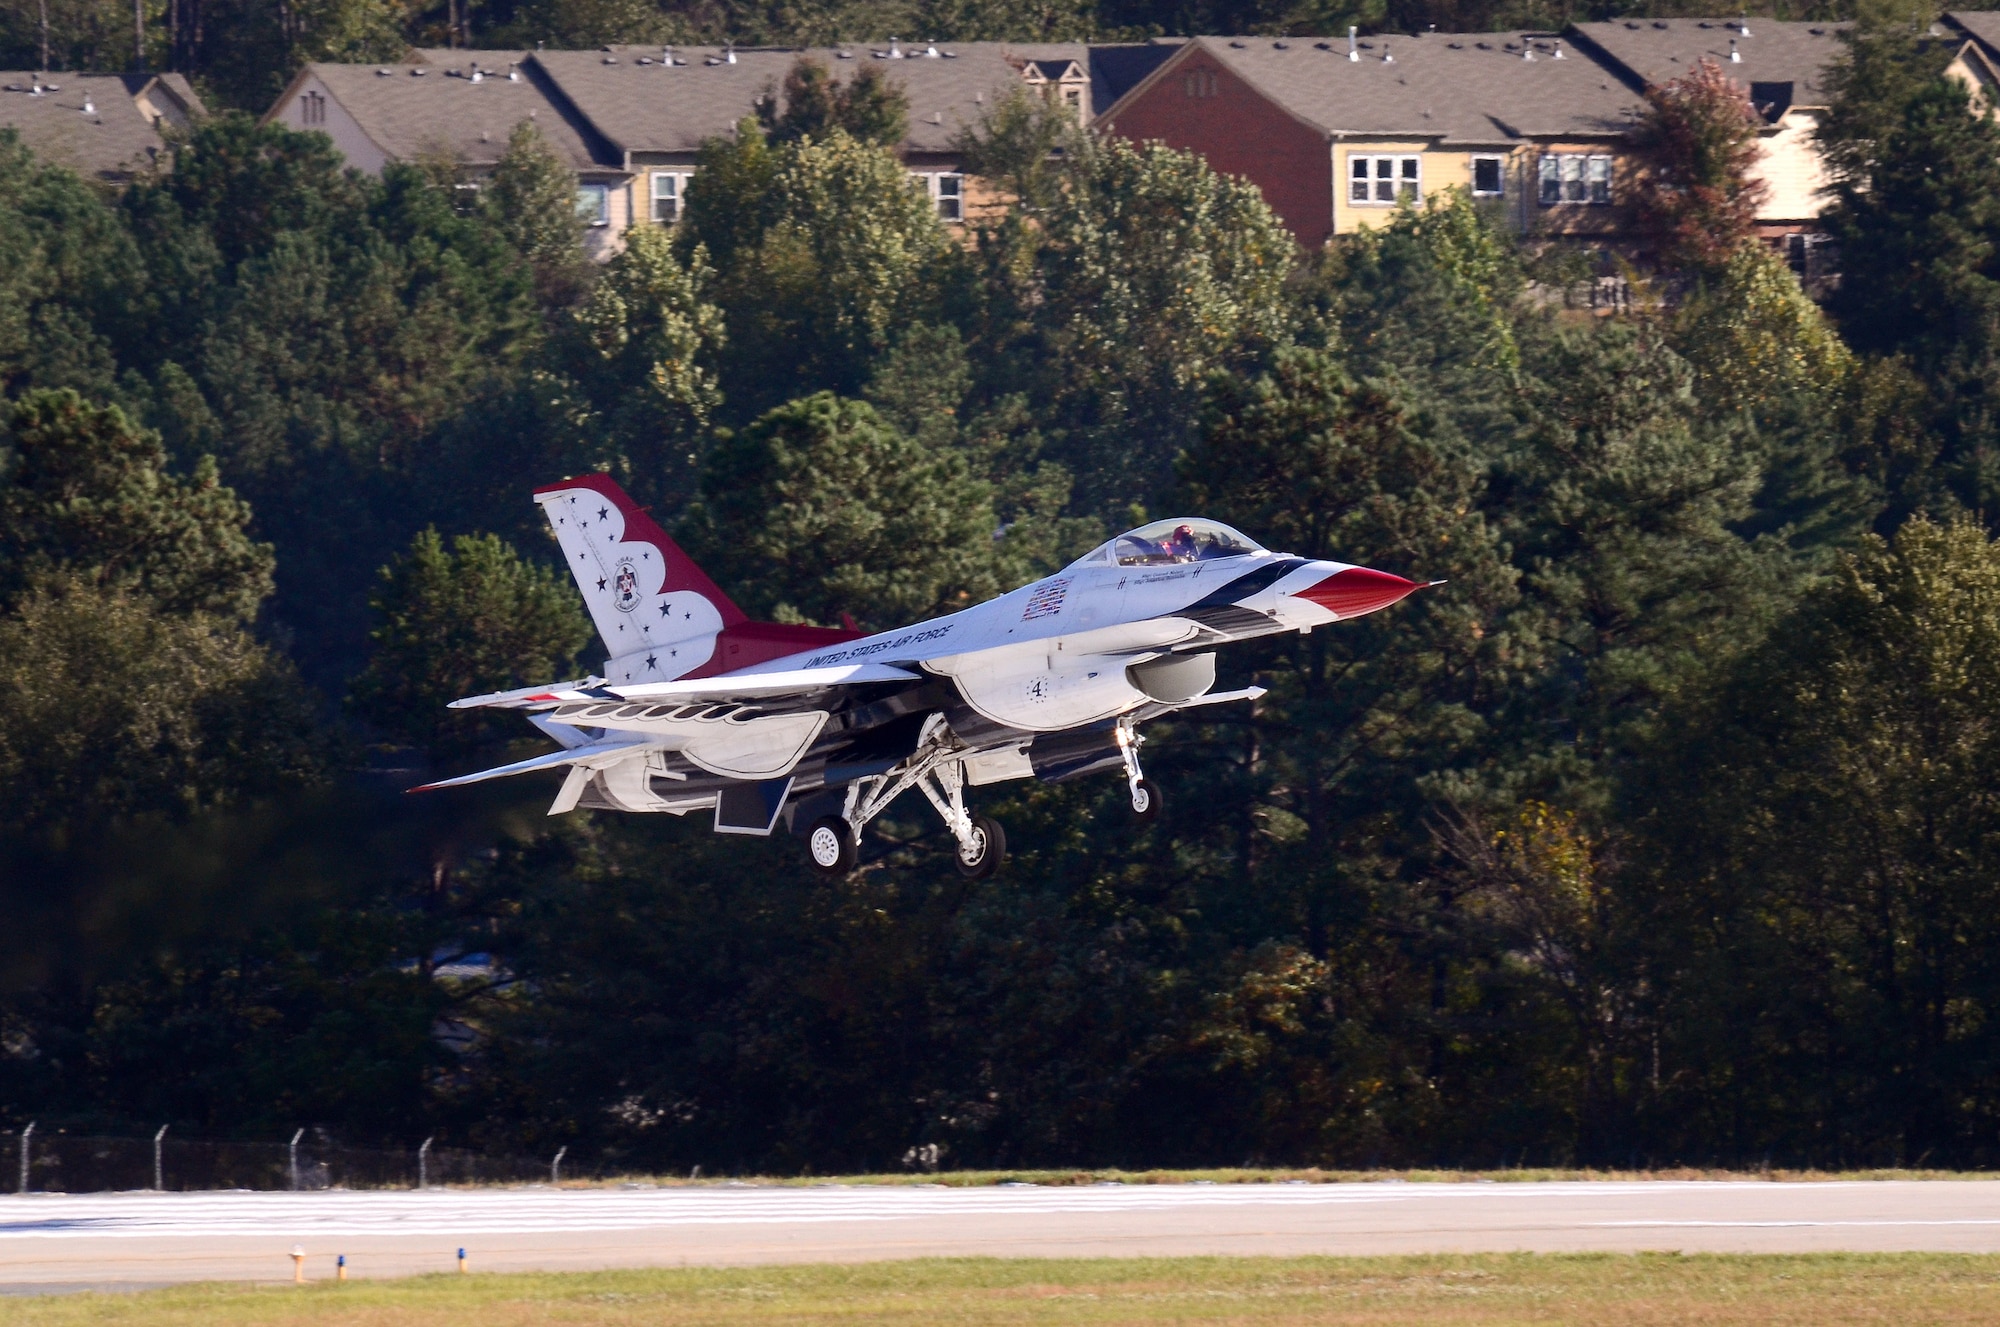 Thunderbird #4, Maj. Curtis Dougherty, flying the slot in the diamond formation, returns to Dobbins Air Reserve Base from the Wings Over North Georgia air show Oct. 18, 2014. The USAF Air Demonstration Squadron Thunderbirds are using Dobbins as their base of operations for their performances at the air show this weekend at the Russell Regional Airport in Rome, Georgia. (U.S. Air Force photo/ Brad Fallin/Released)